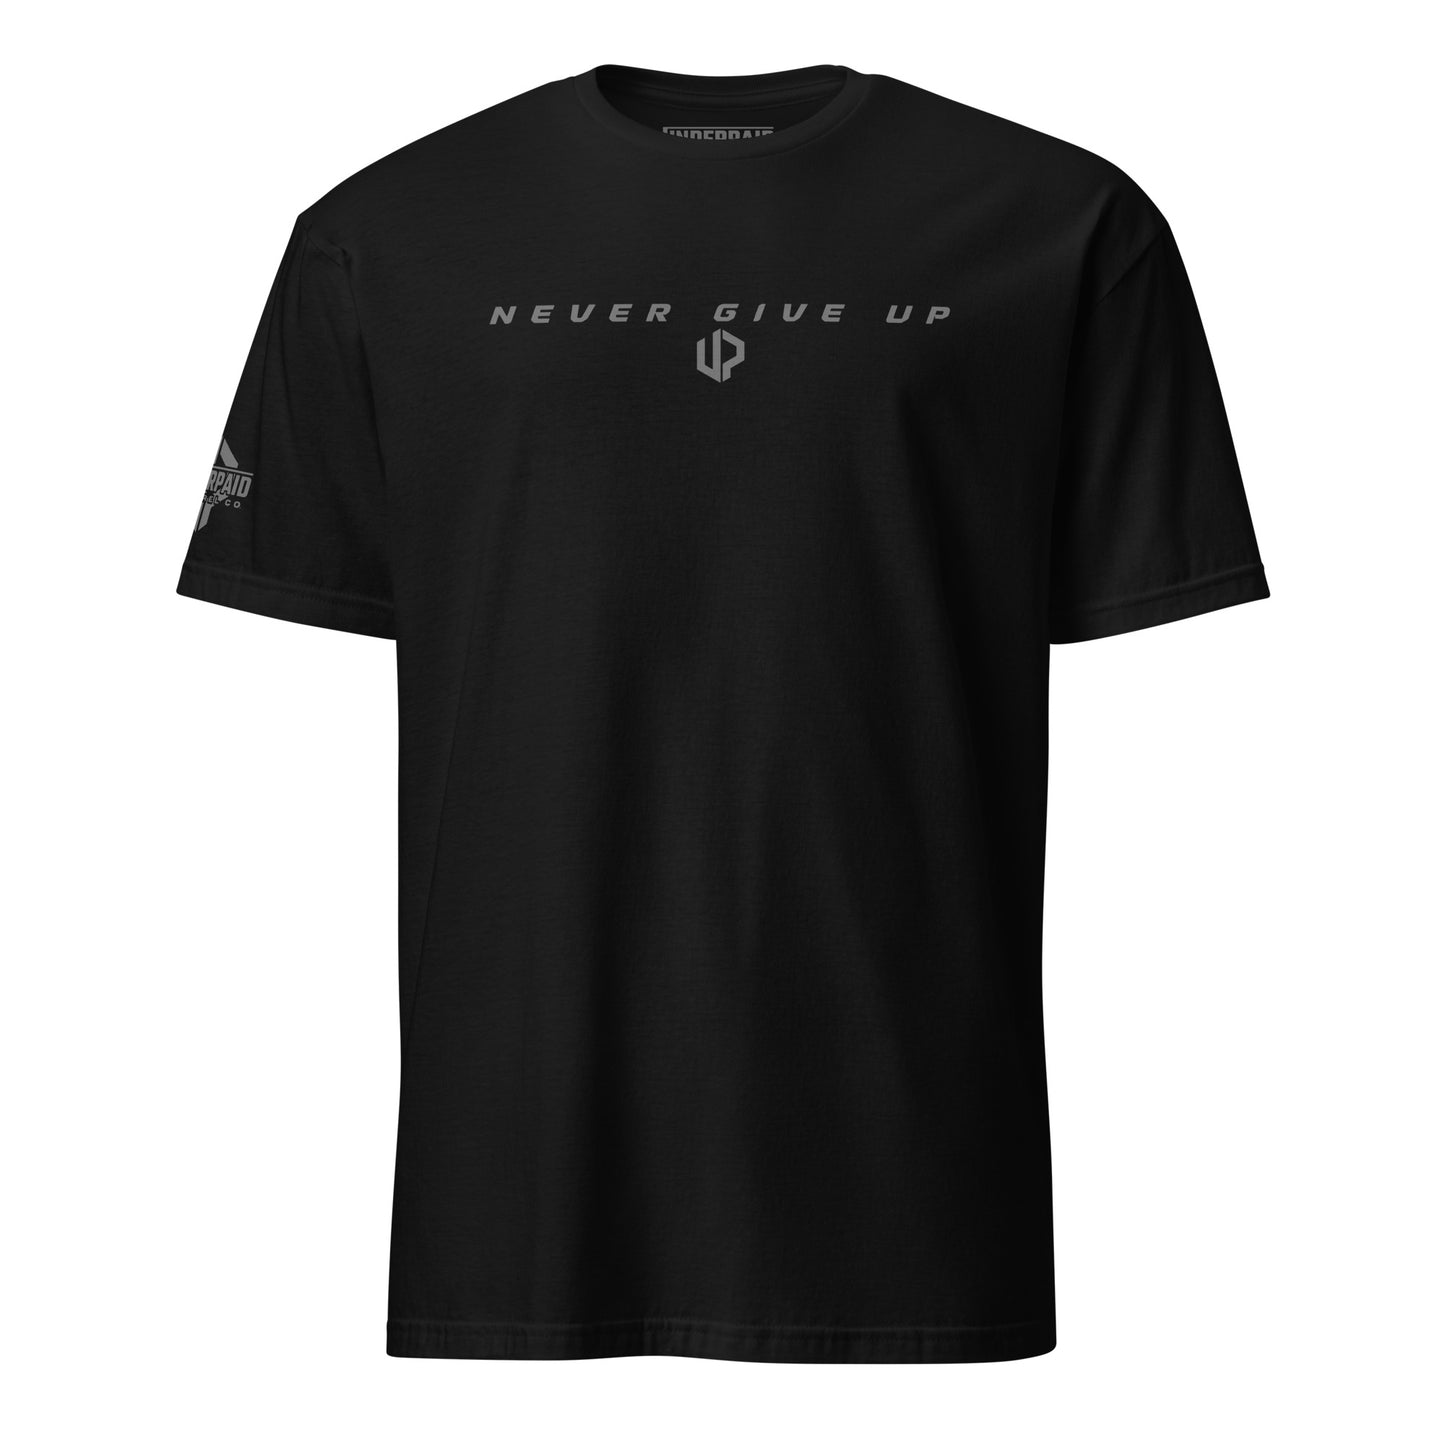 NEVER GIVE UP- S/S Tee